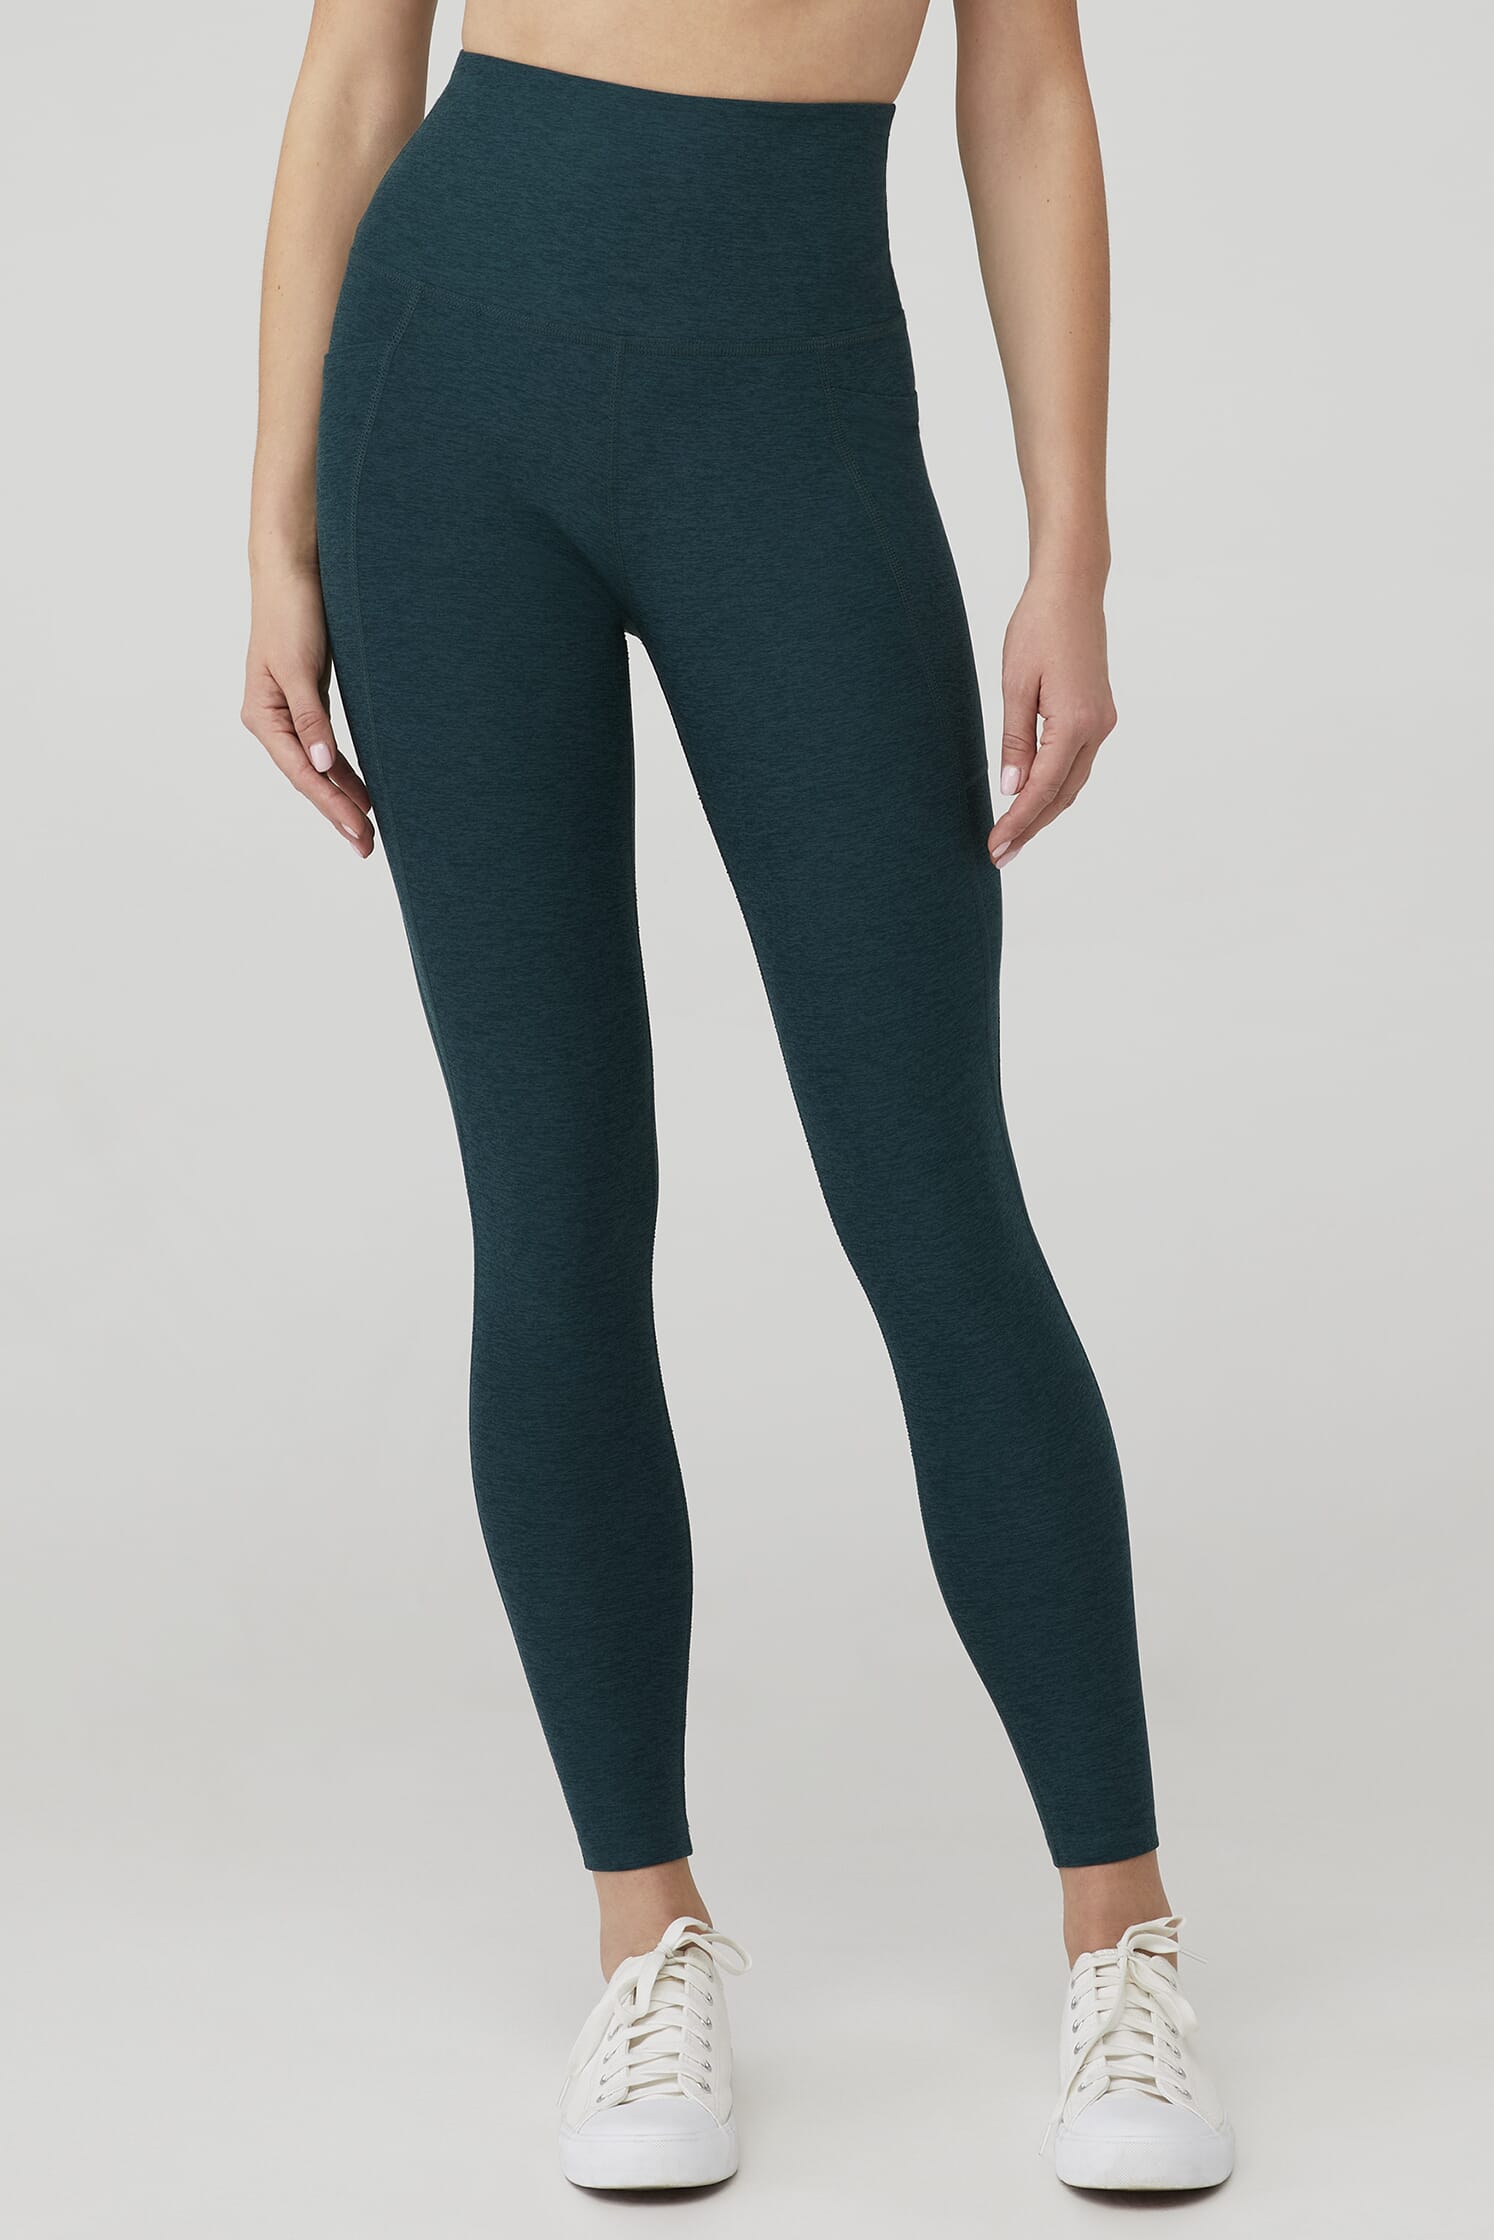 https://images.fashionpass.com/products/spacedye-out-of-pocket-high-waisted-midi-legging-1-beyond-yoga-midnight-green-heather-650-1.jpg?profile=a